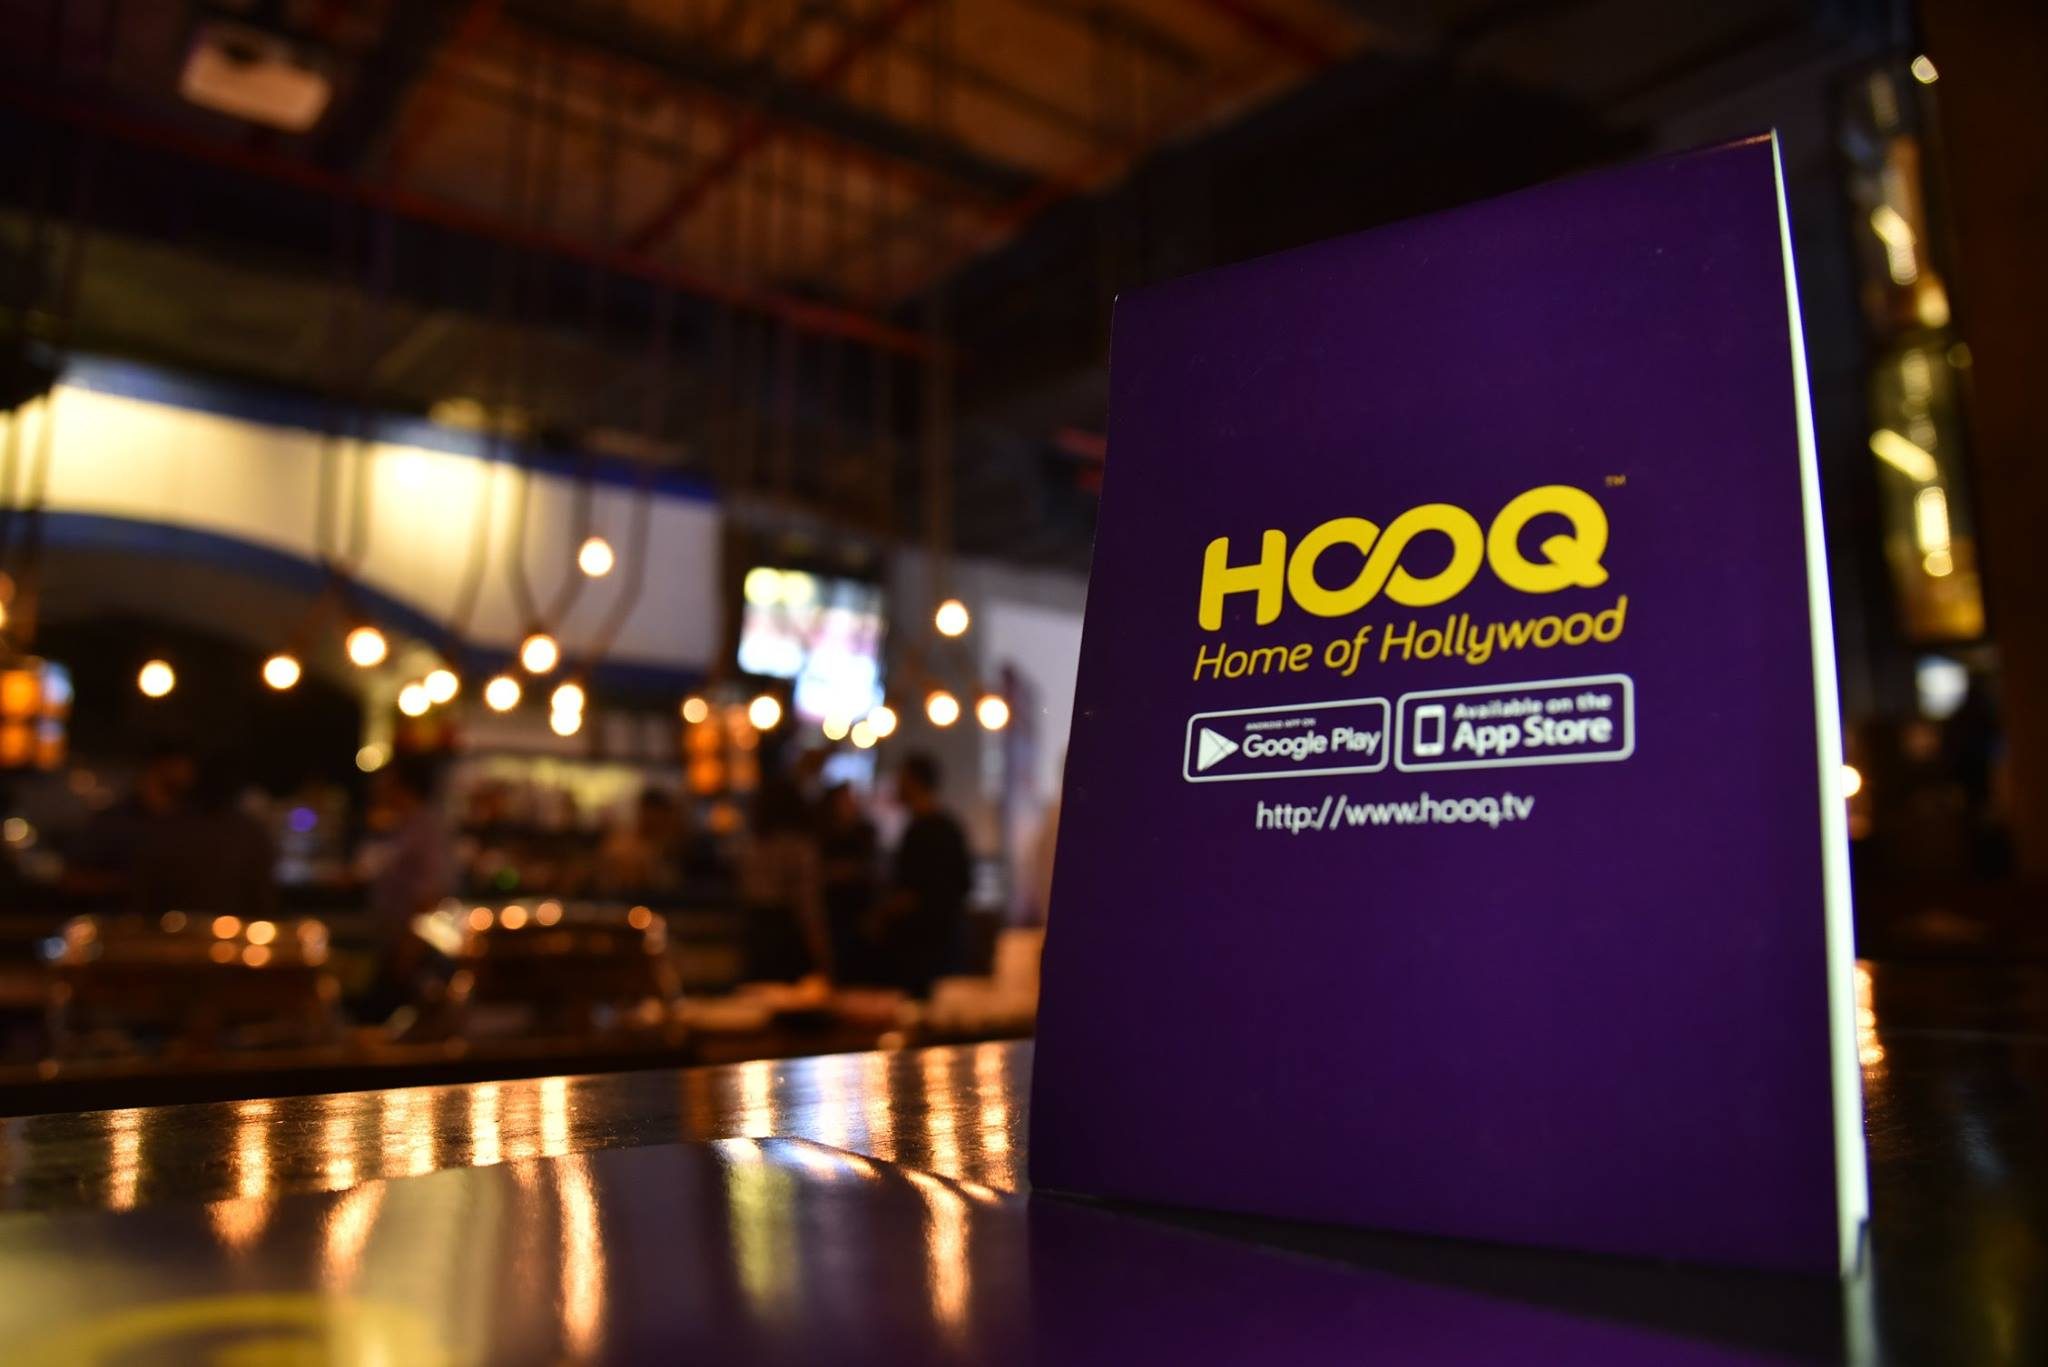 SoftBank-backed Coupang to buy Hooq assets in Asian video entry